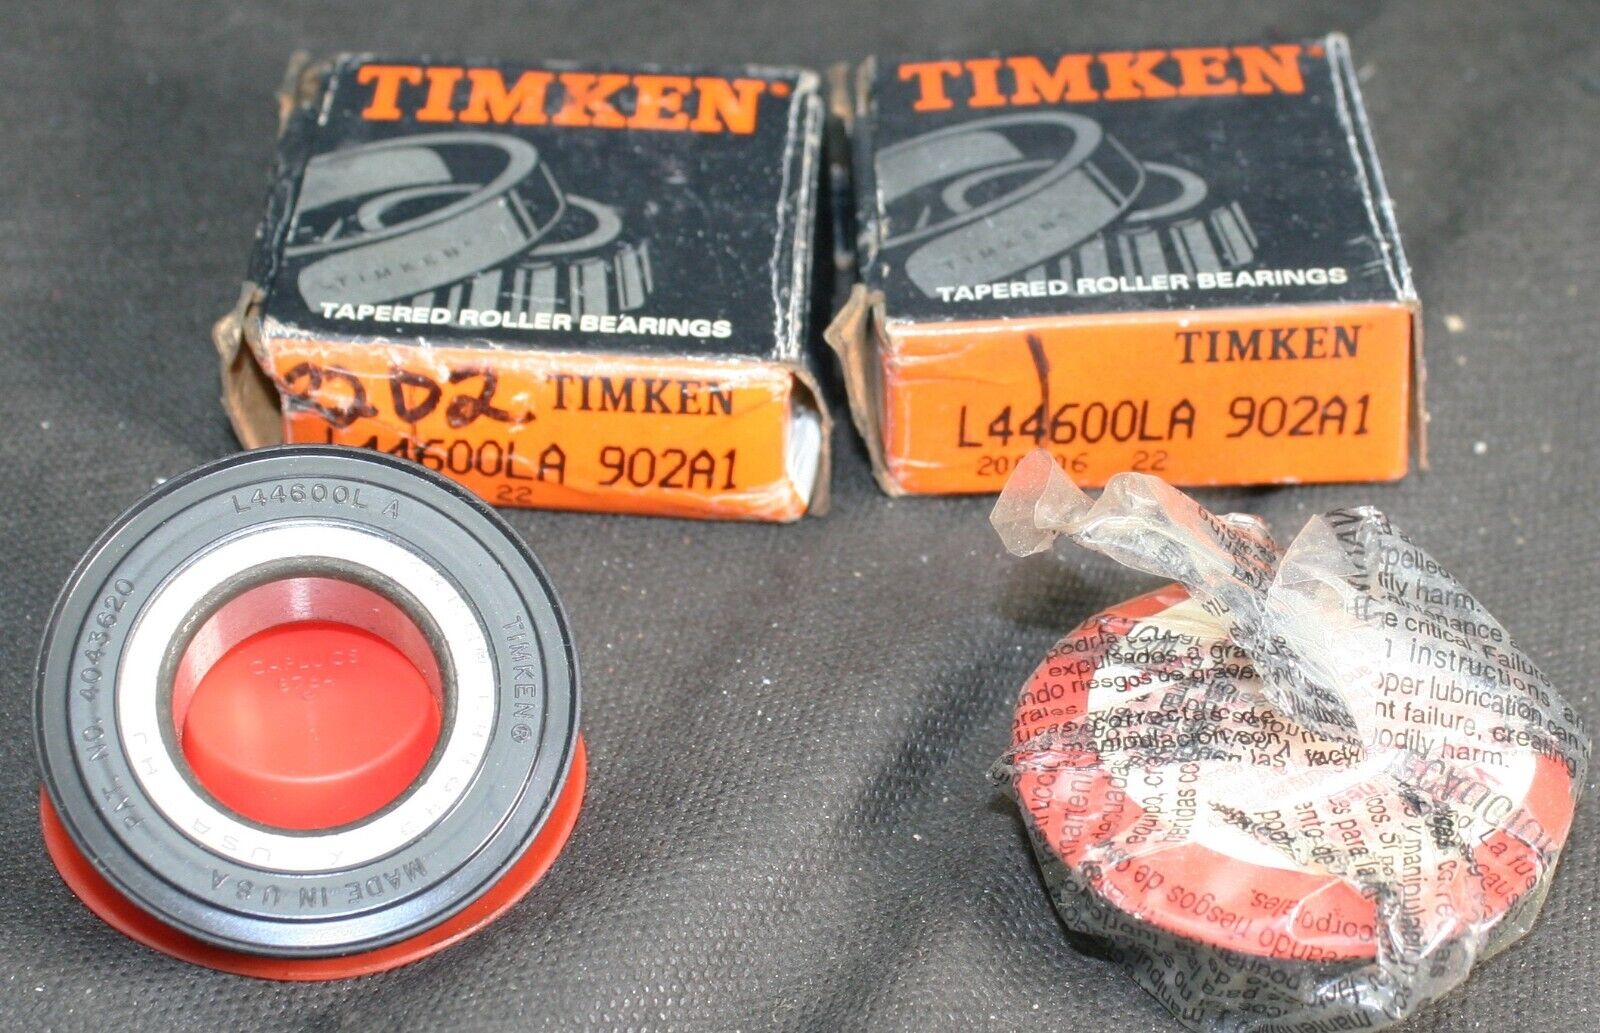 Lot of 2 Timken L44600LA-902A1 Tapered Roller Bearing Cone 1-3/8\